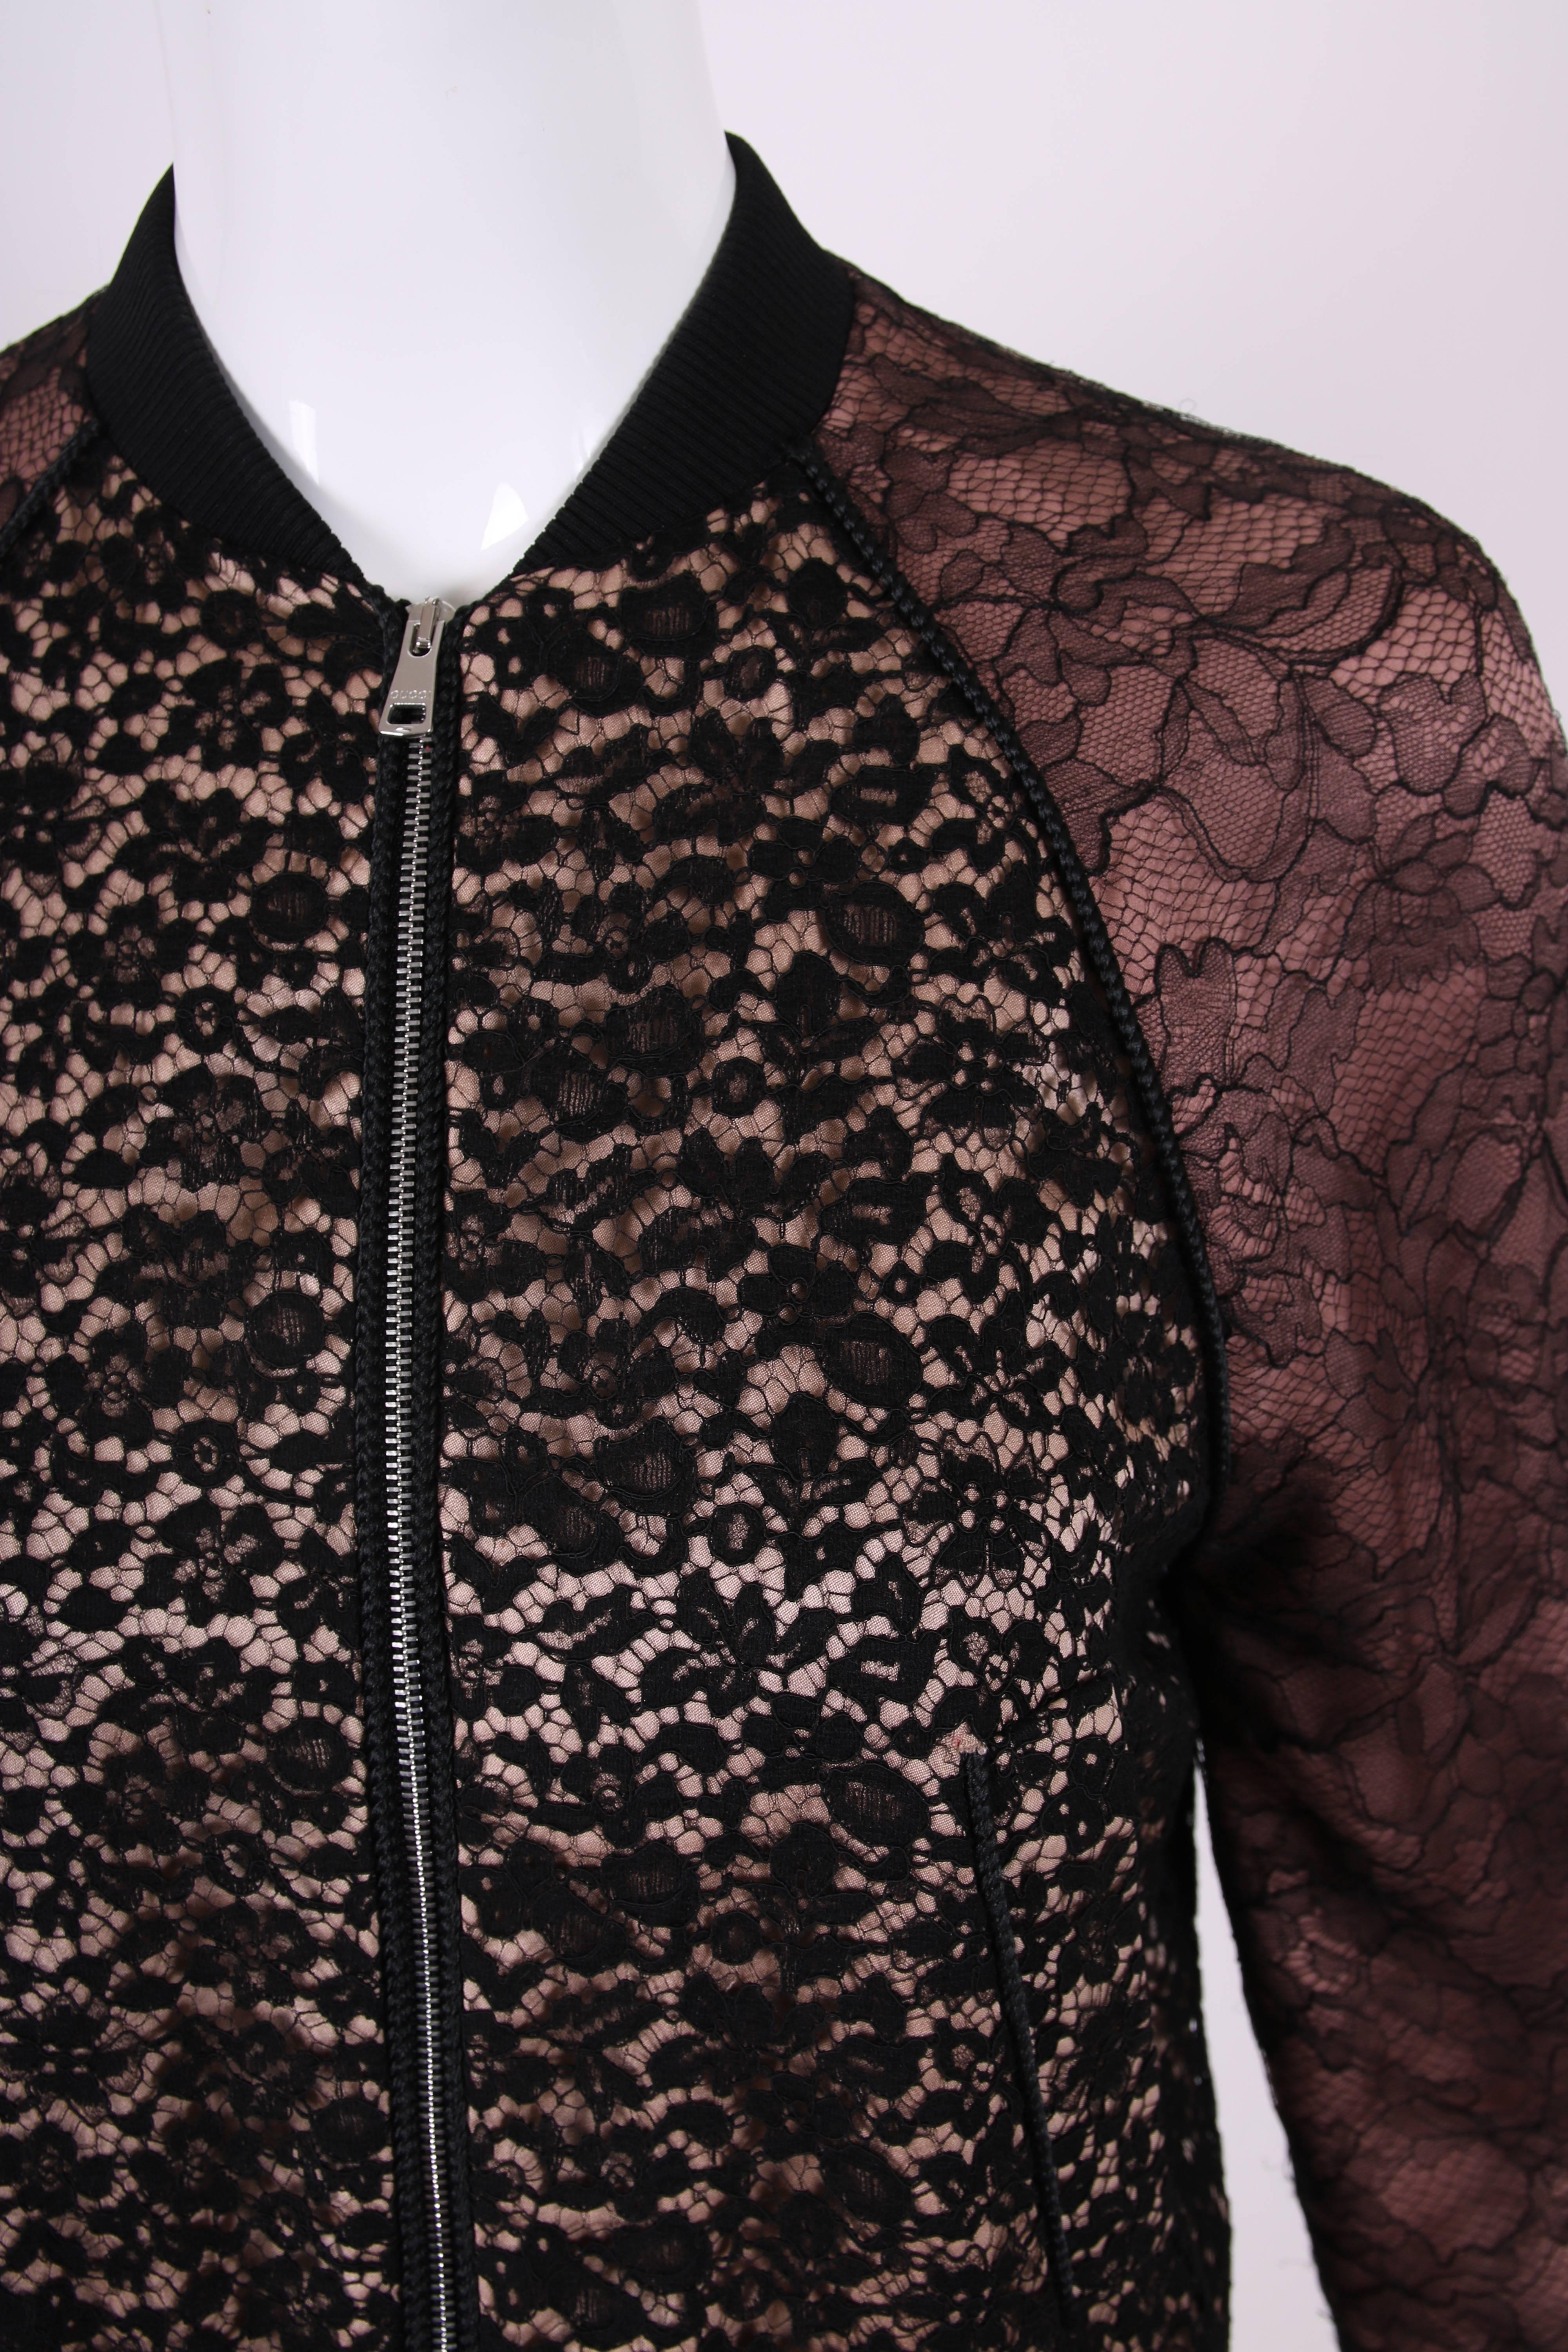 2016 Gucci Black & Dusty Rose Lace Bomber Jacket In Excellent Condition For Sale In Studio City, CA